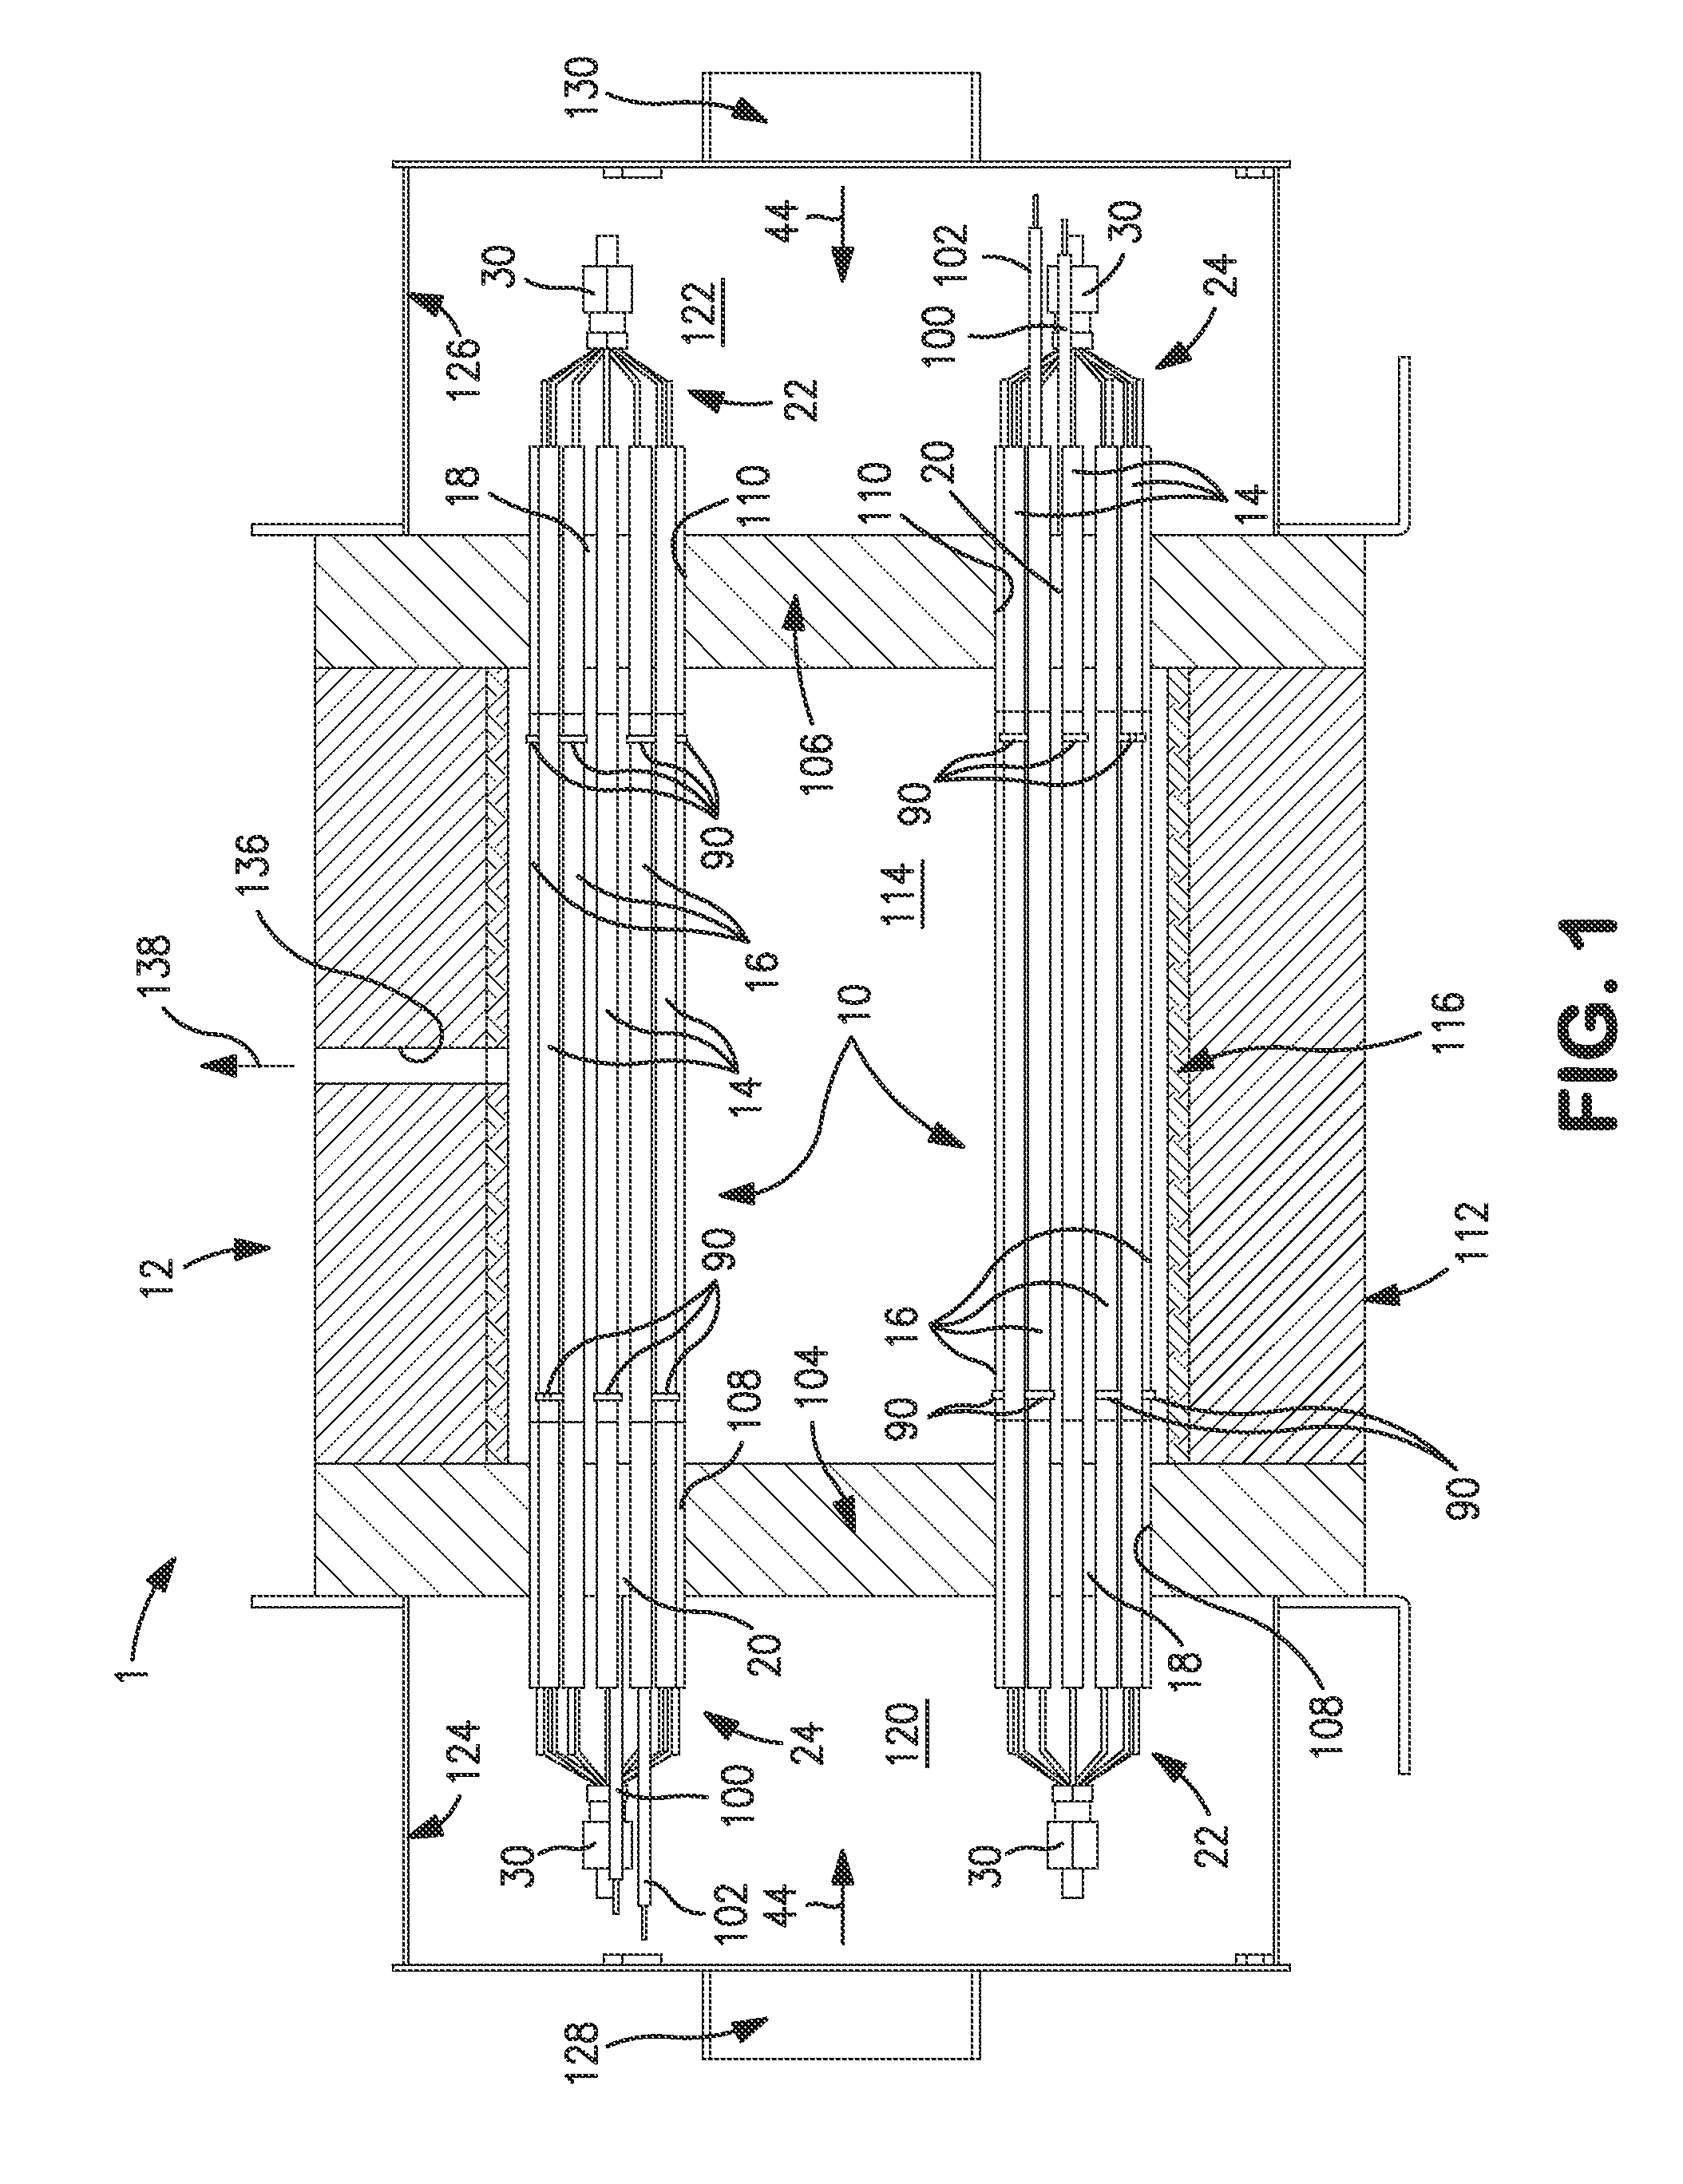 Oxygen separation module and apparatus